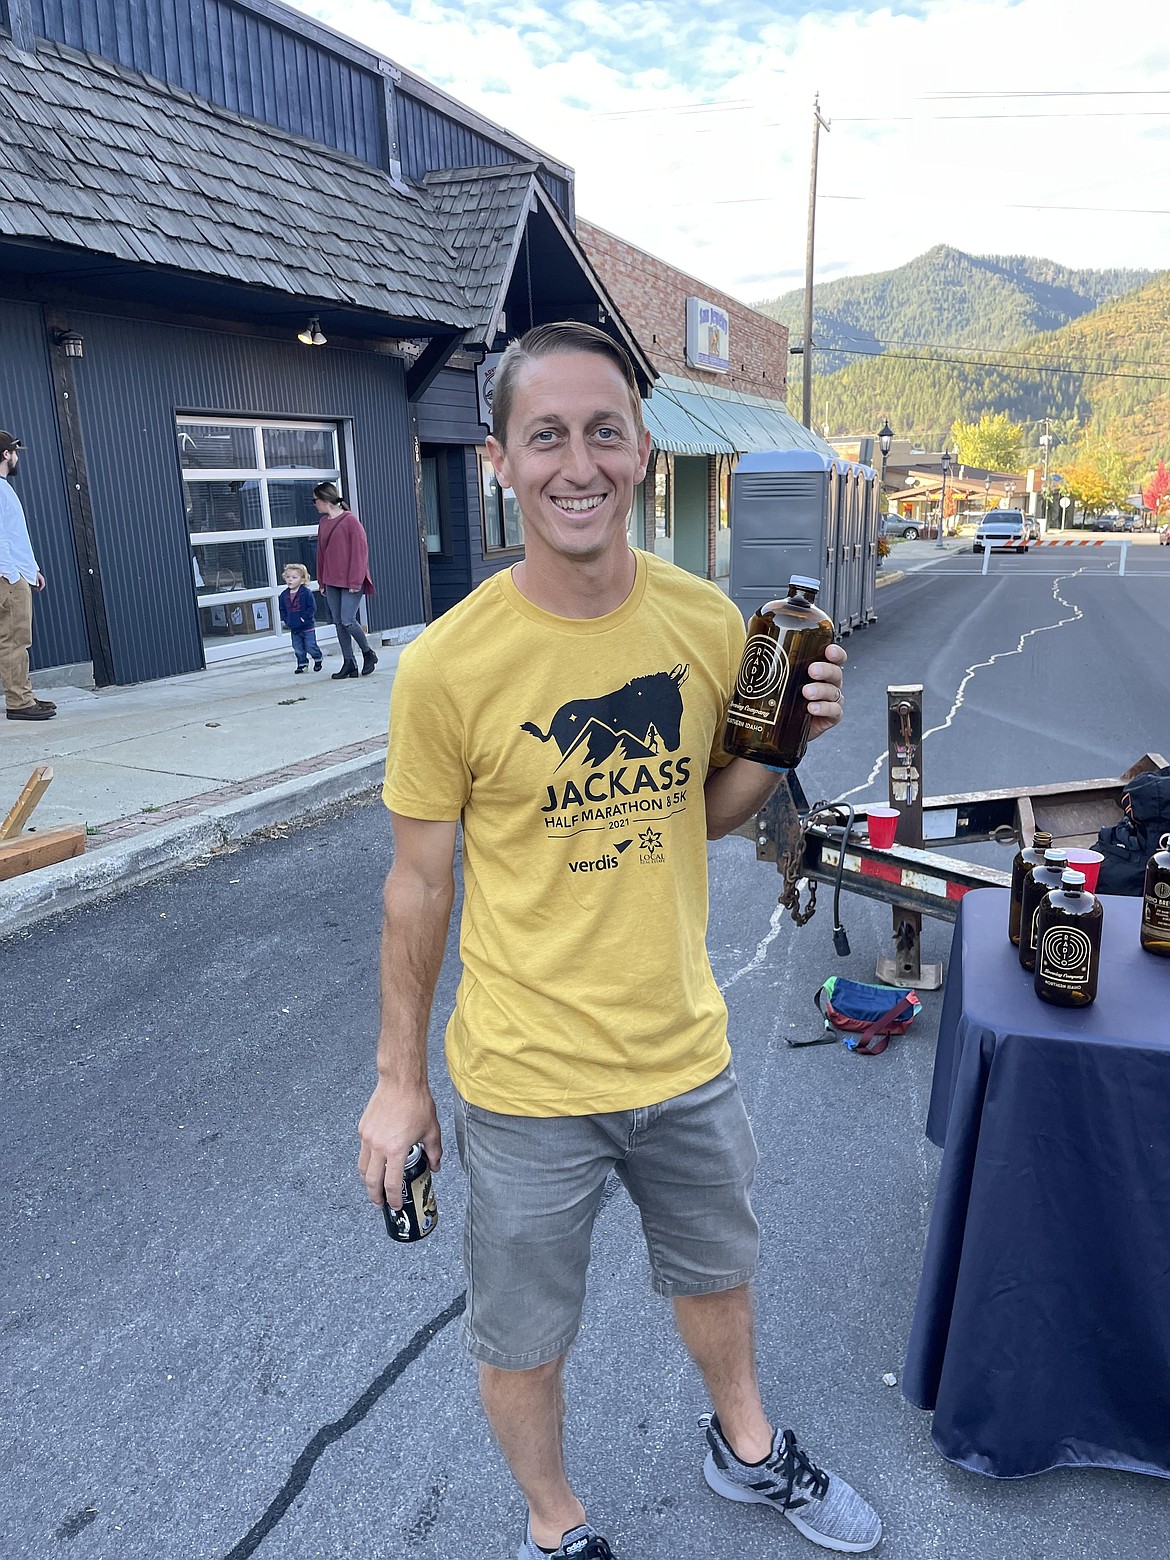 John Harris of Liberty Lake, Wash. finished the Jackass Half Marathon with the fastest time of 1:17:30 on Saturday.